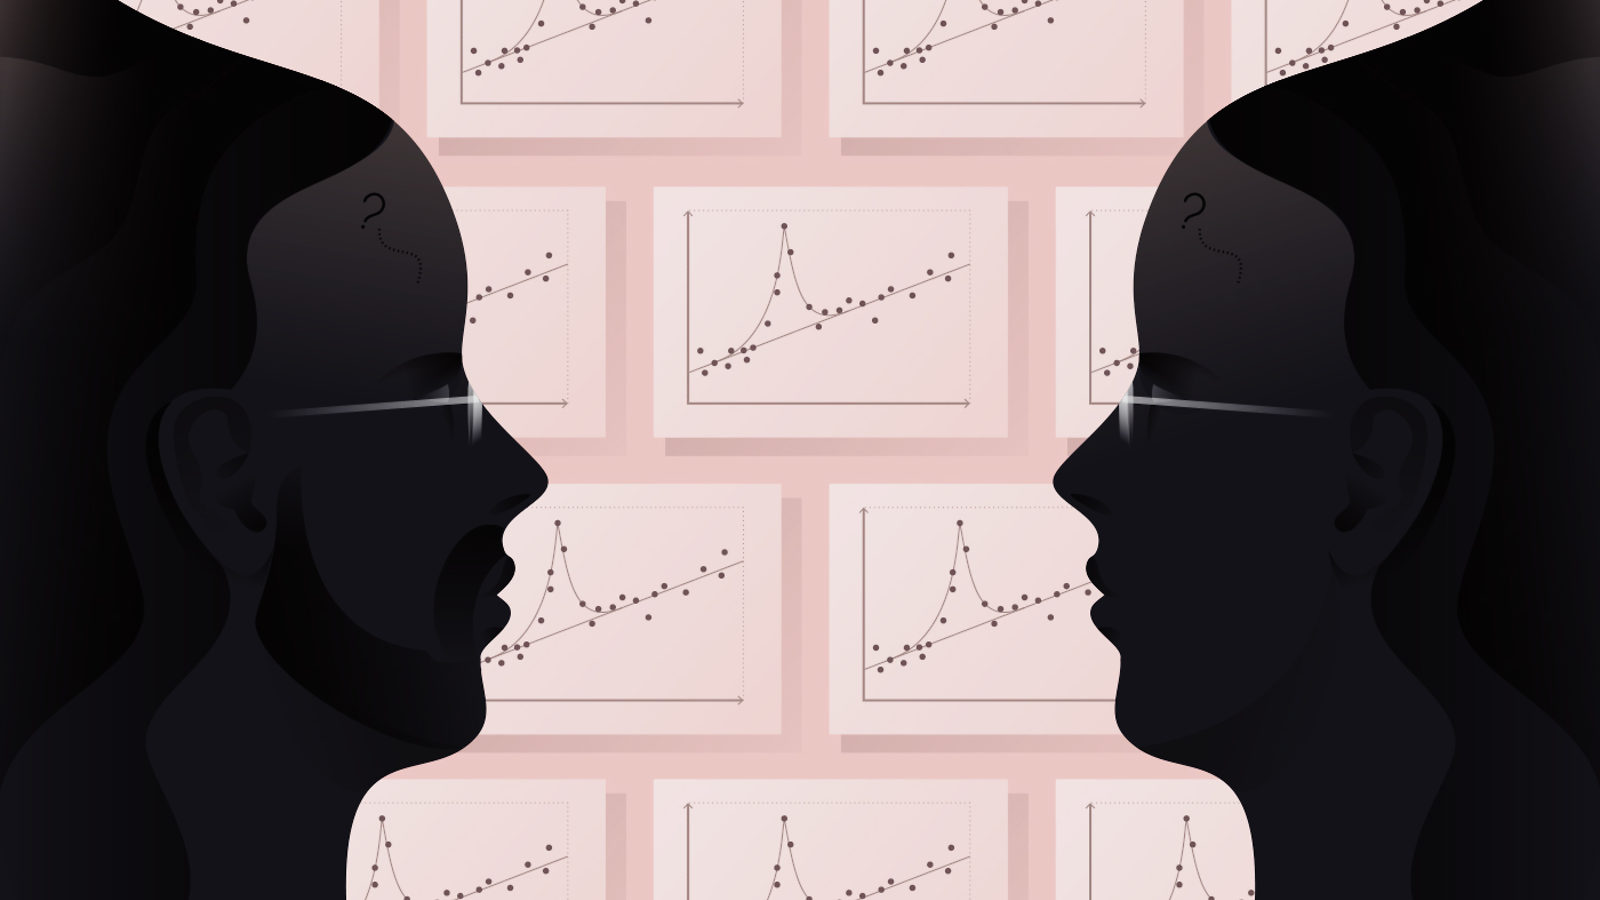 Illustration of man's profile in black on the left, woman's profile on right. Pink background with coated in brick pattern